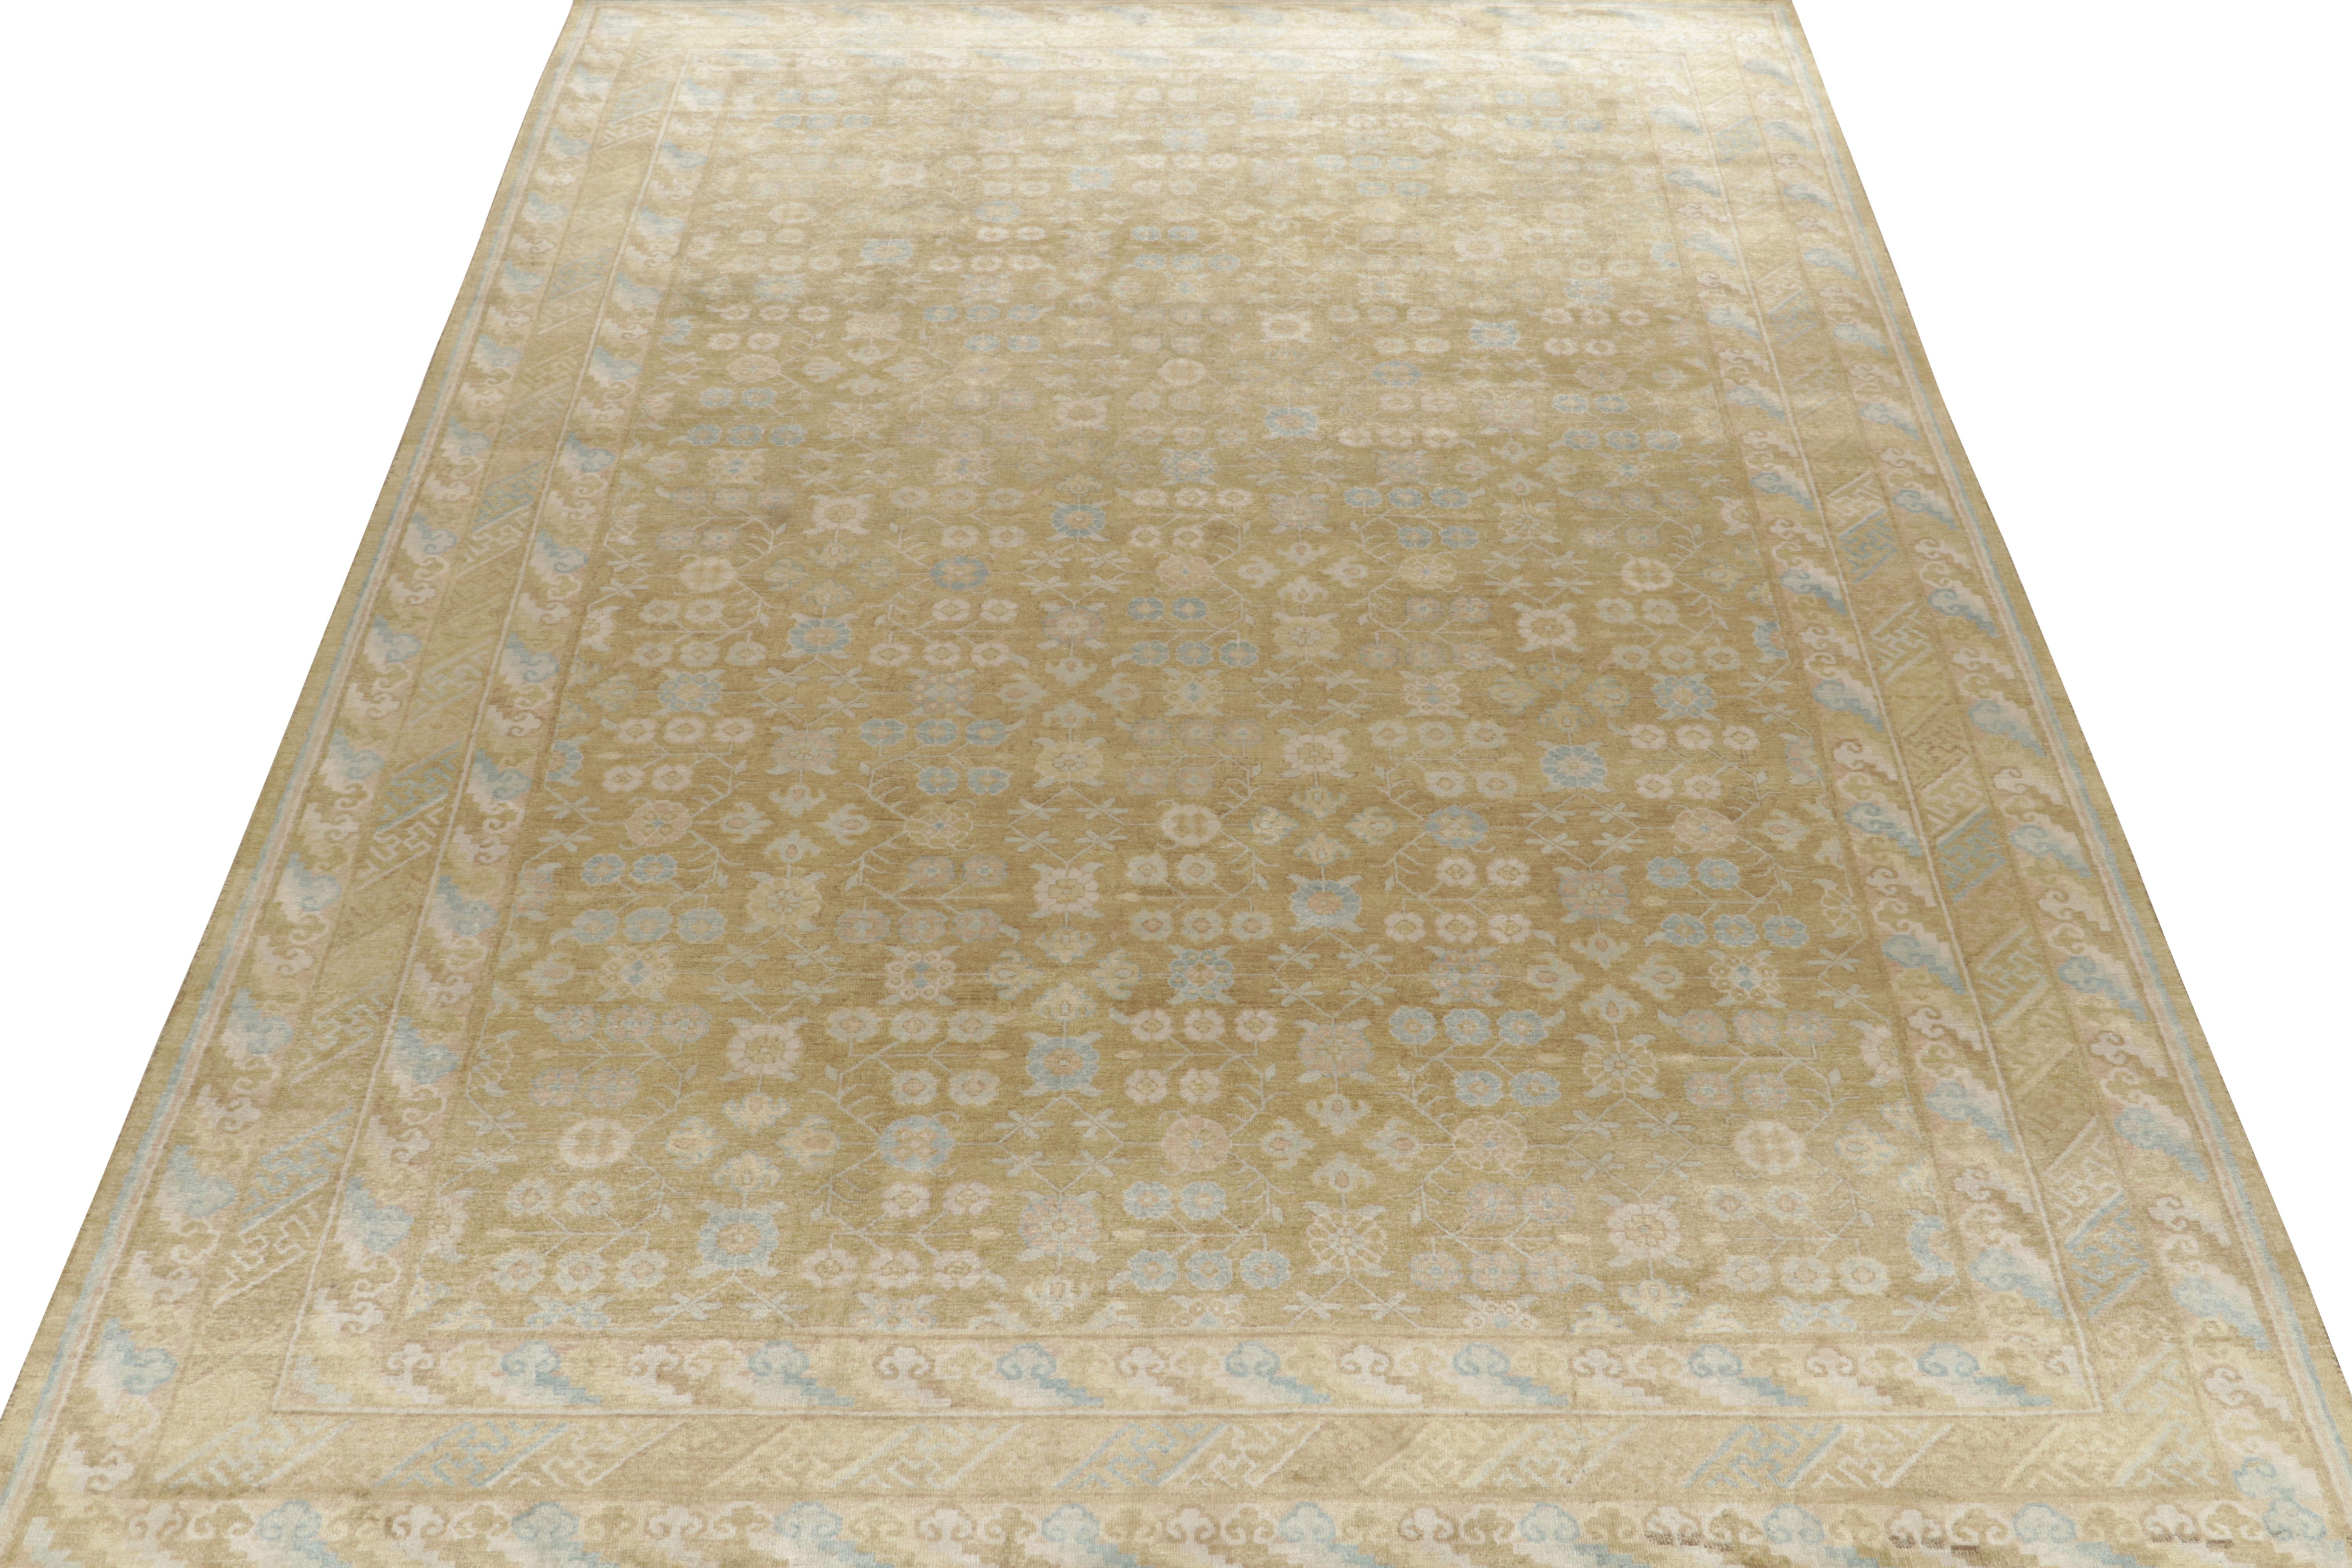 Indian Rug & Kilim’s Khotan style rug in Gold, Beige-Brown and Blue Patterns For Sale